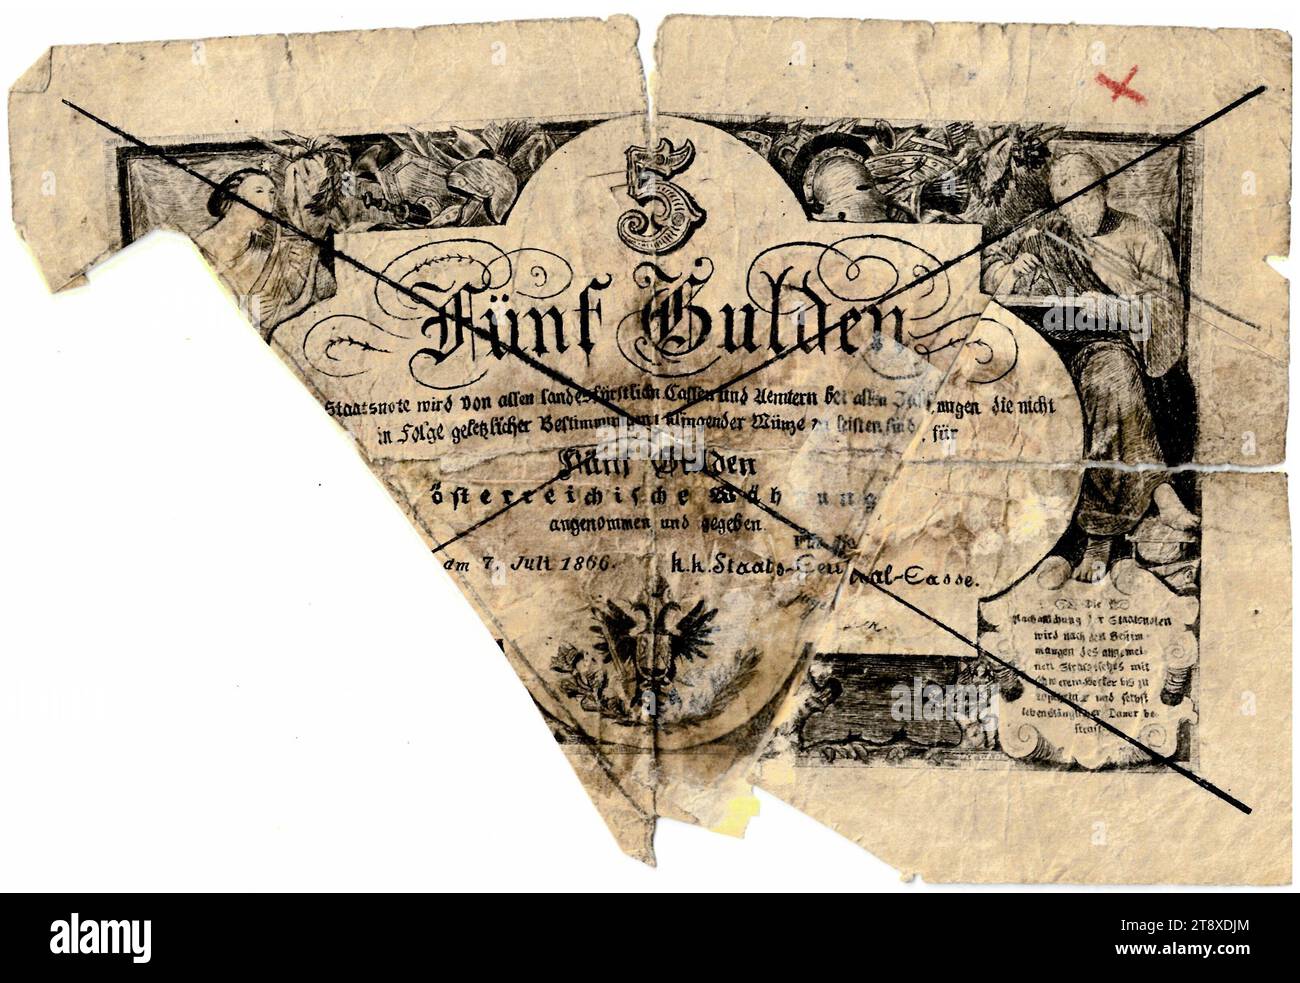 Staatsnote (Fälschung), 5 Gulden, K. K. Staats-Central-Casse, mint authority, Date after 07.07.1866, paper, printing, width 72 mm, height 89 mm, Mint, Wien, Mint territory, Österreich, Kaiserreich (1804-1867), Finance, counterfeit, forgery, coat of arms (as symbol of the state, etc.), bank-note, money, The Vienna Collection Stock Photo